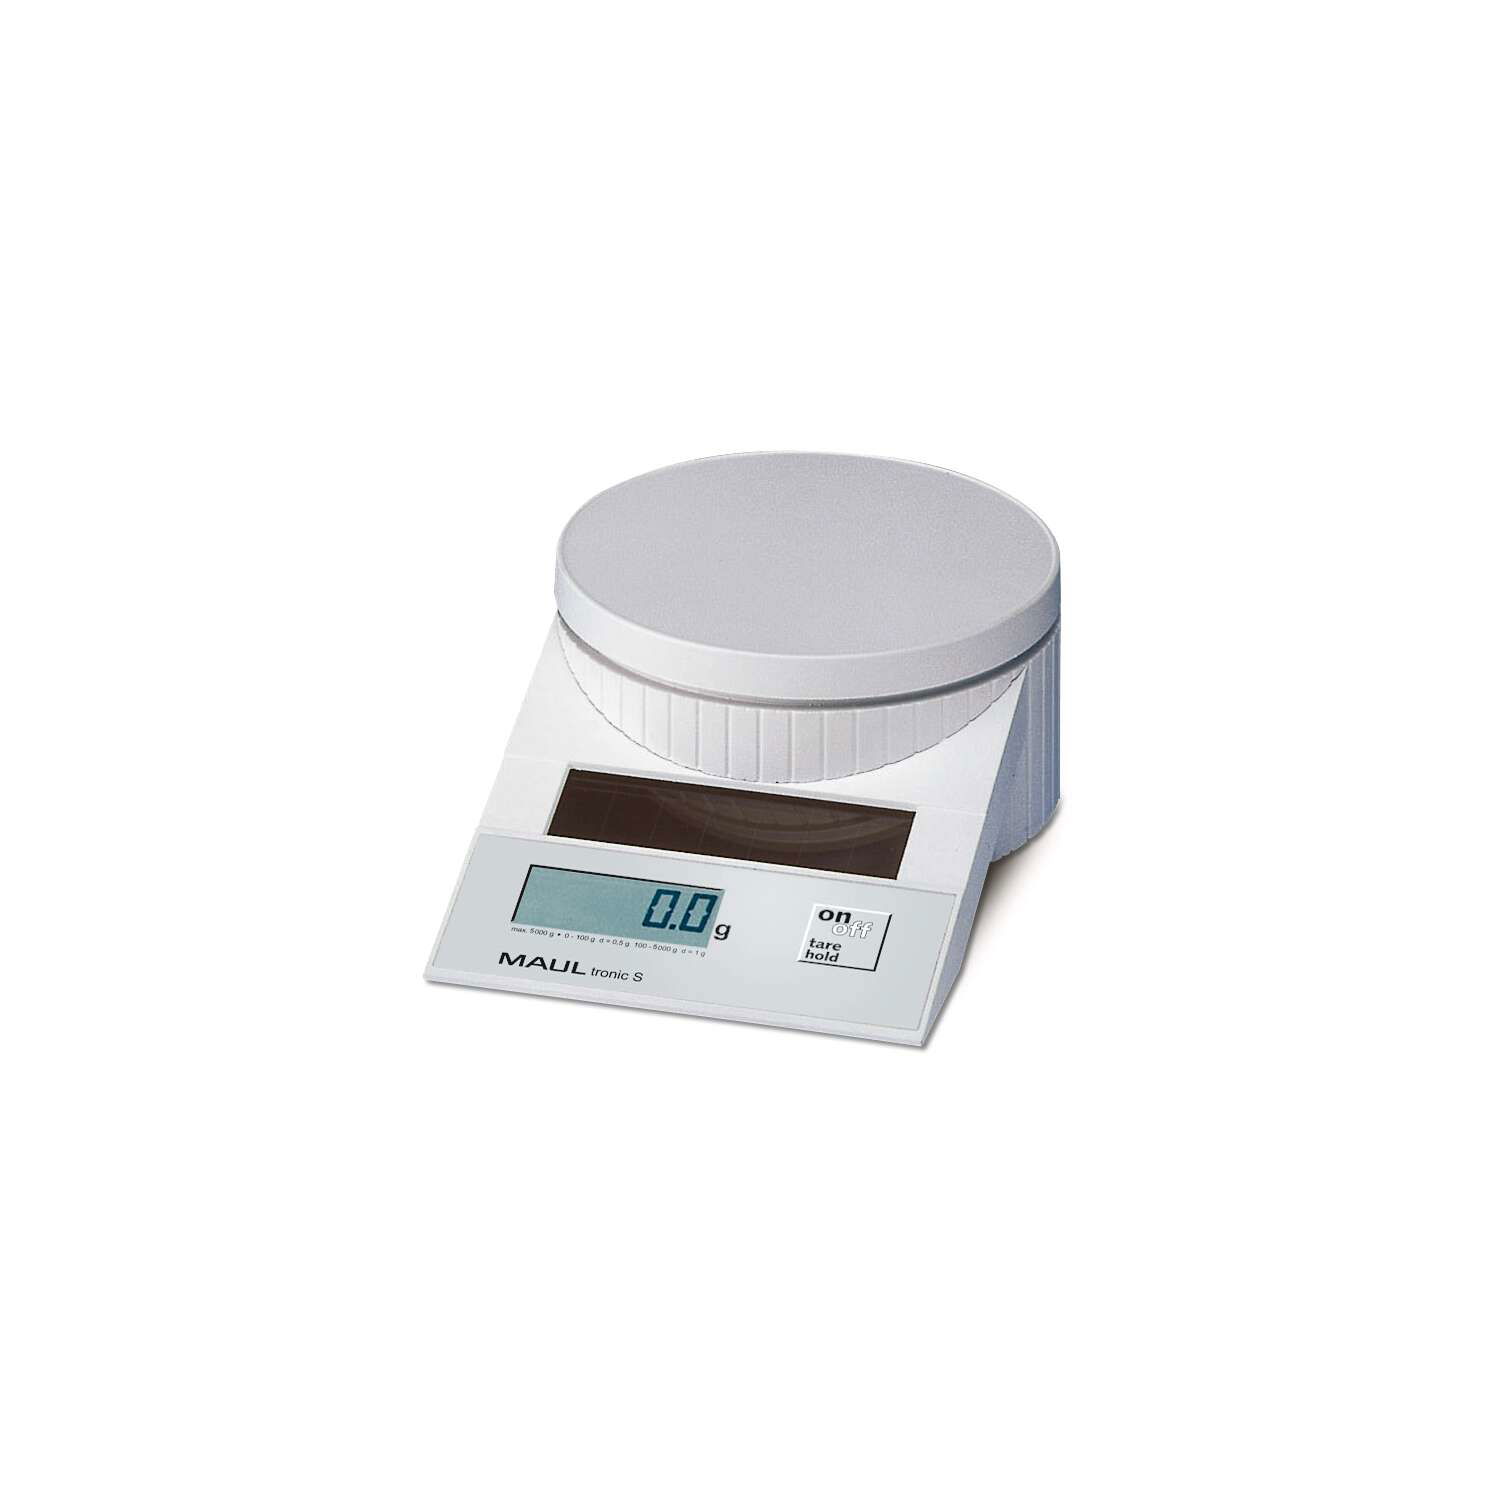 Solar-Briefwaage MAULtronic S, 5000 g